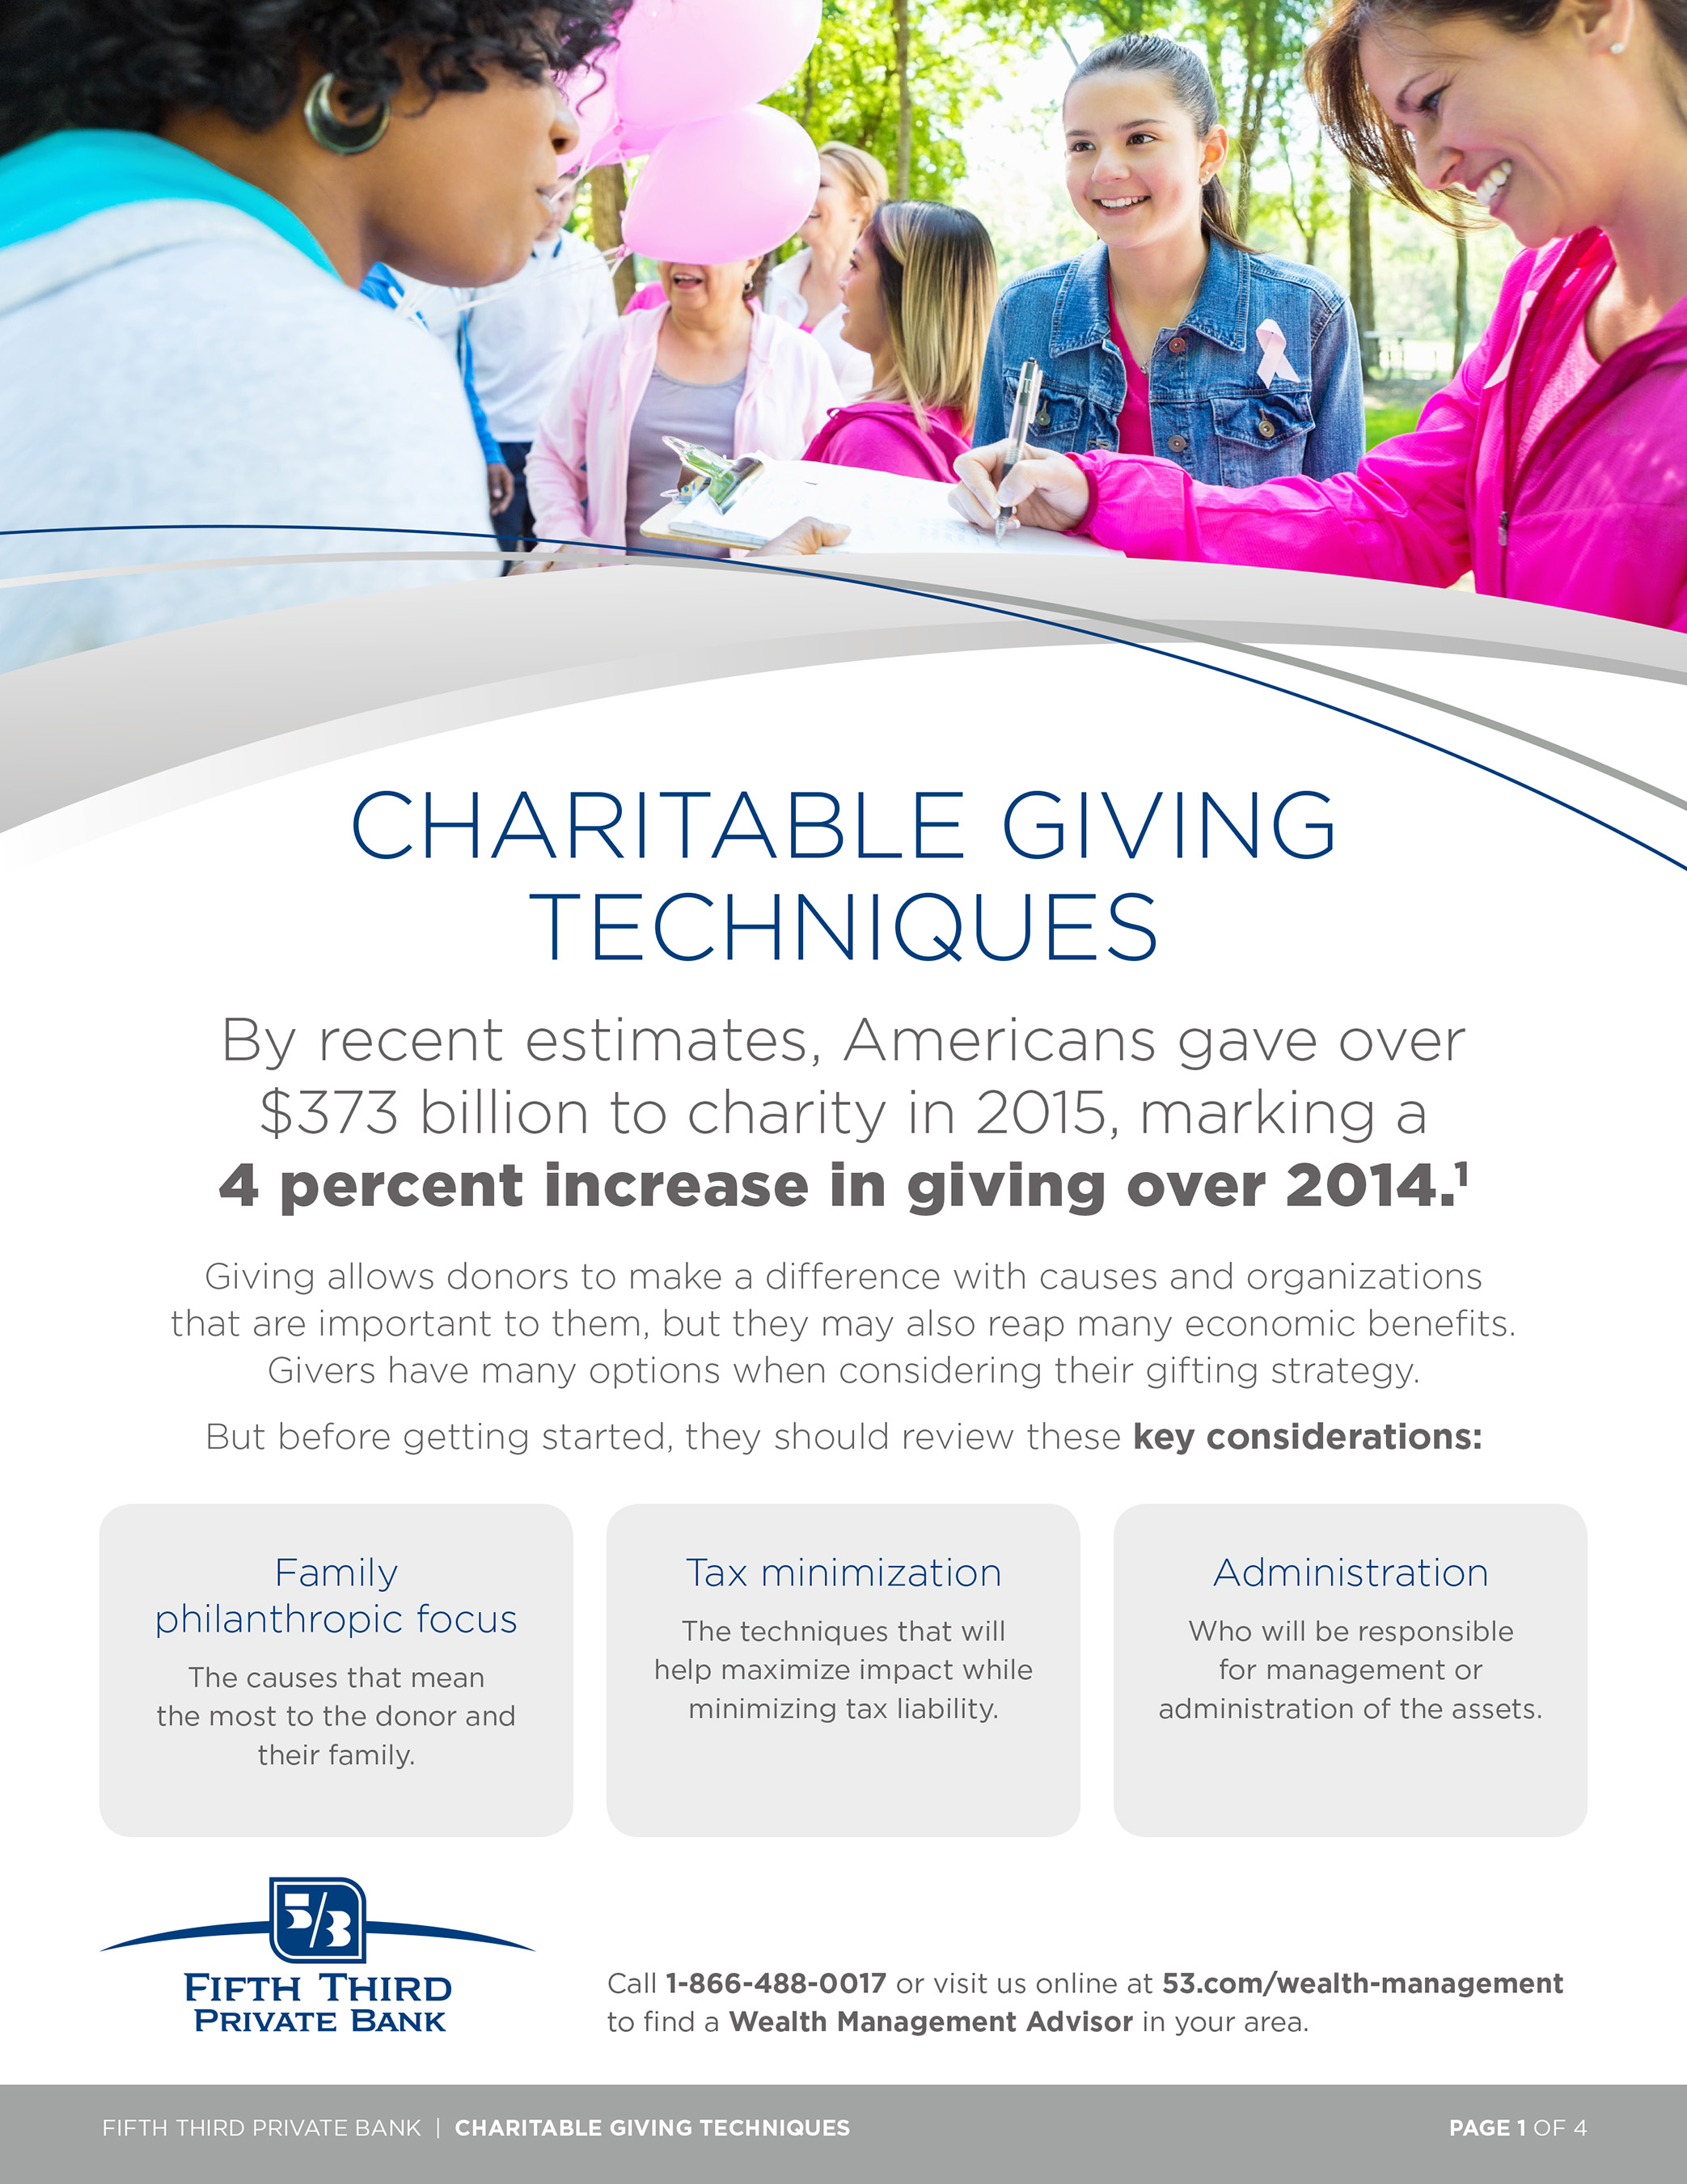 Individuals have many options when considering their charitable giving strategy. But before getting started, they should review these key considerations.